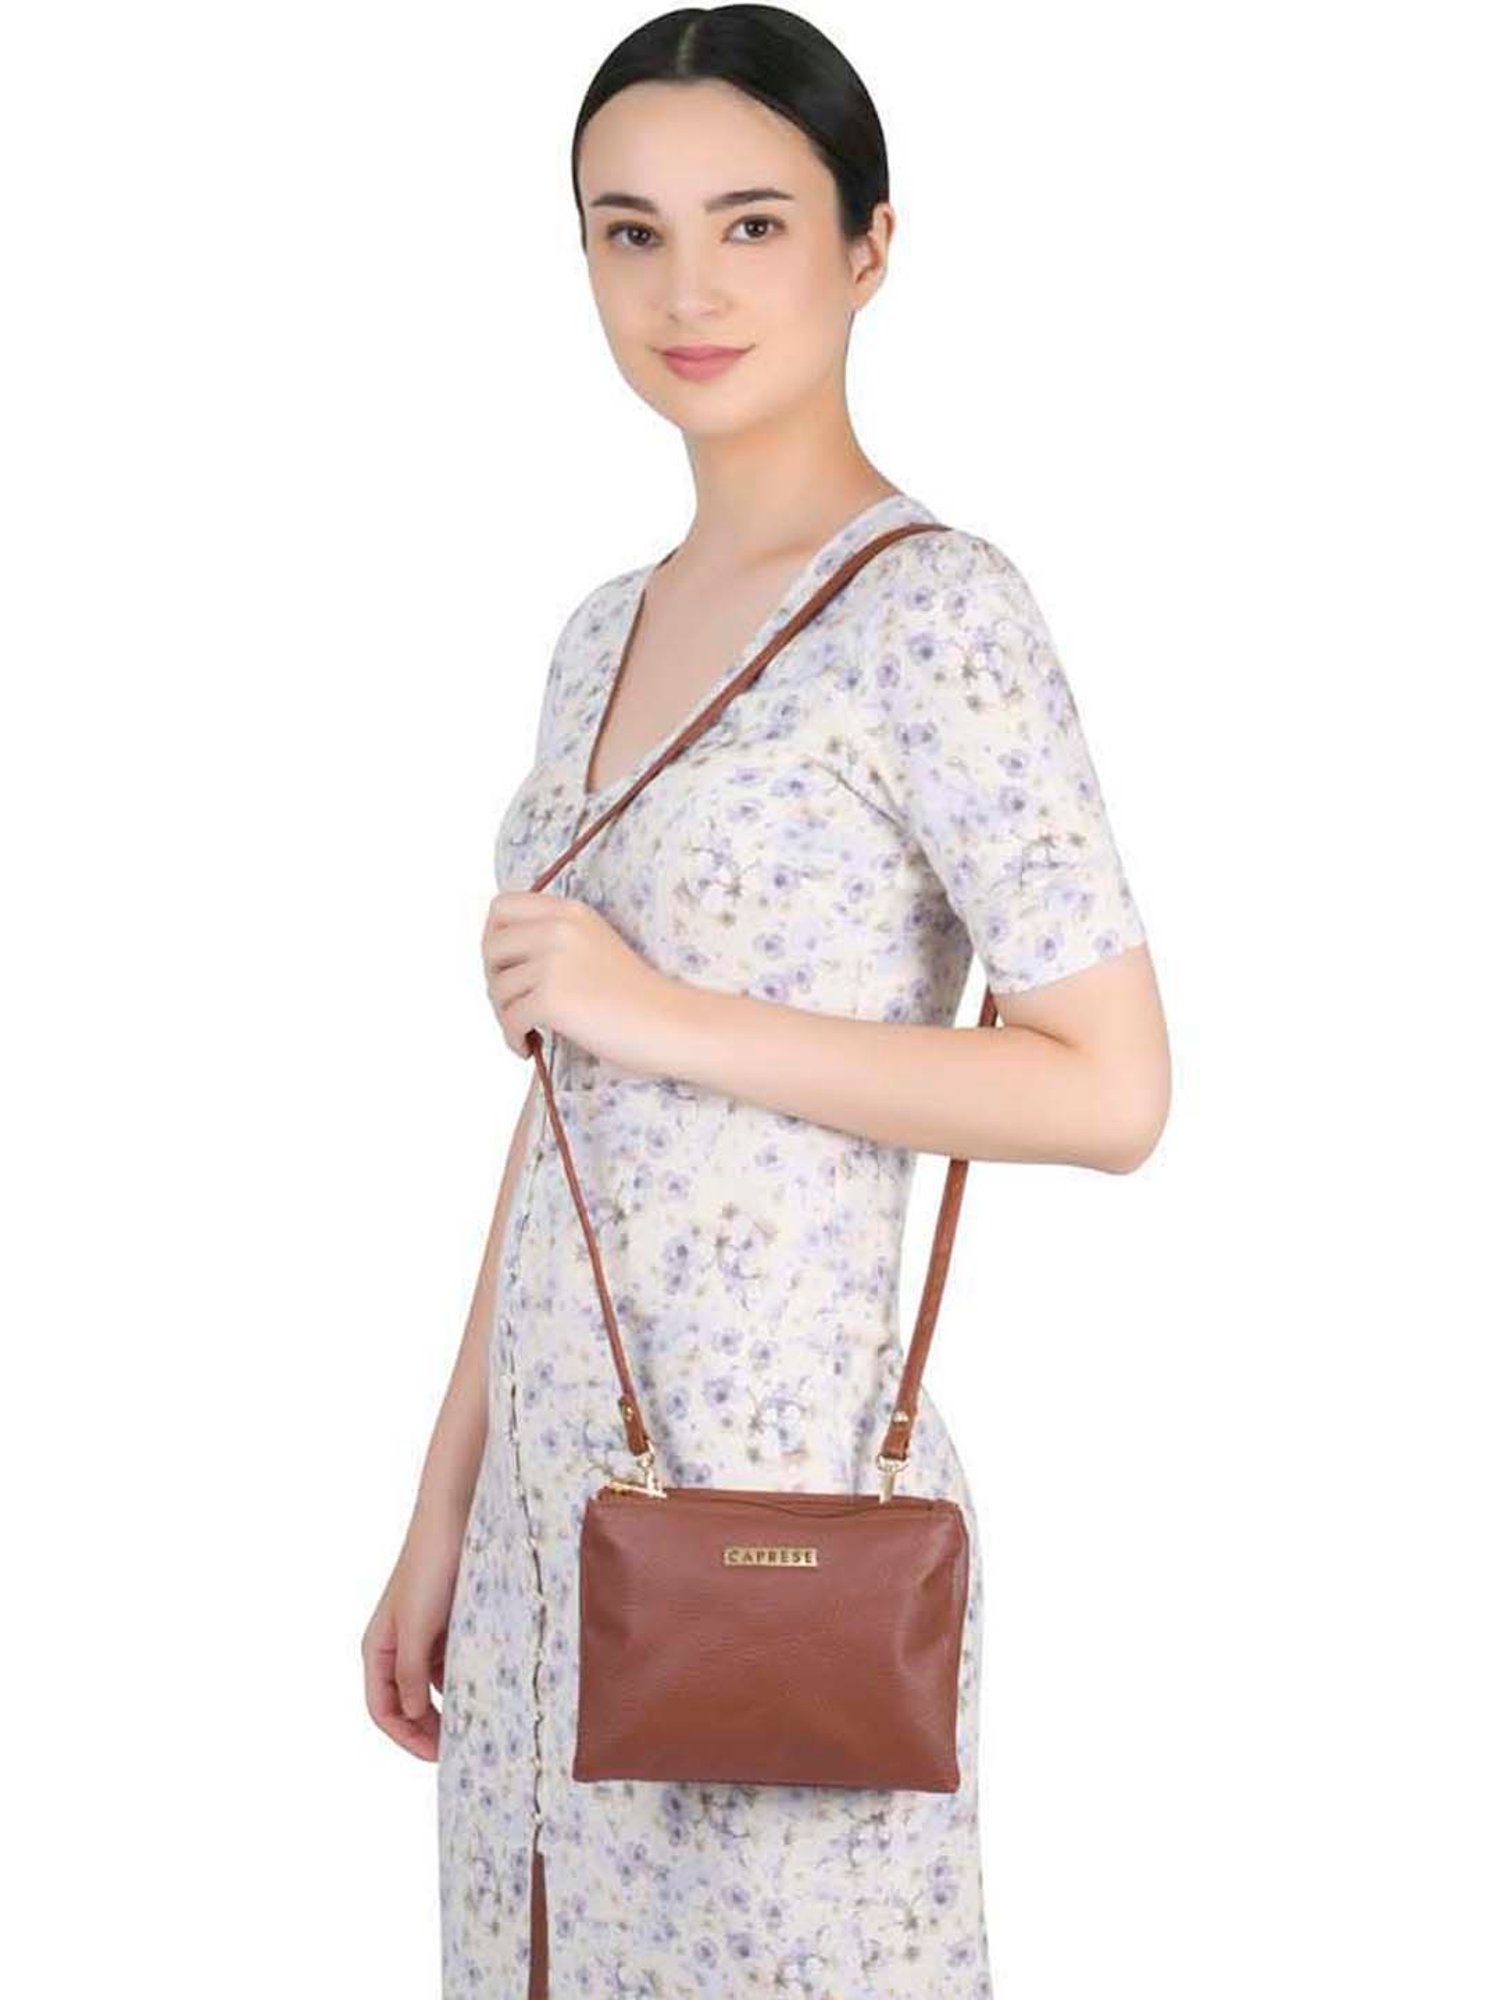 Buy Caprese Brown Sling Bag at Best Prices in India - Snapdeal